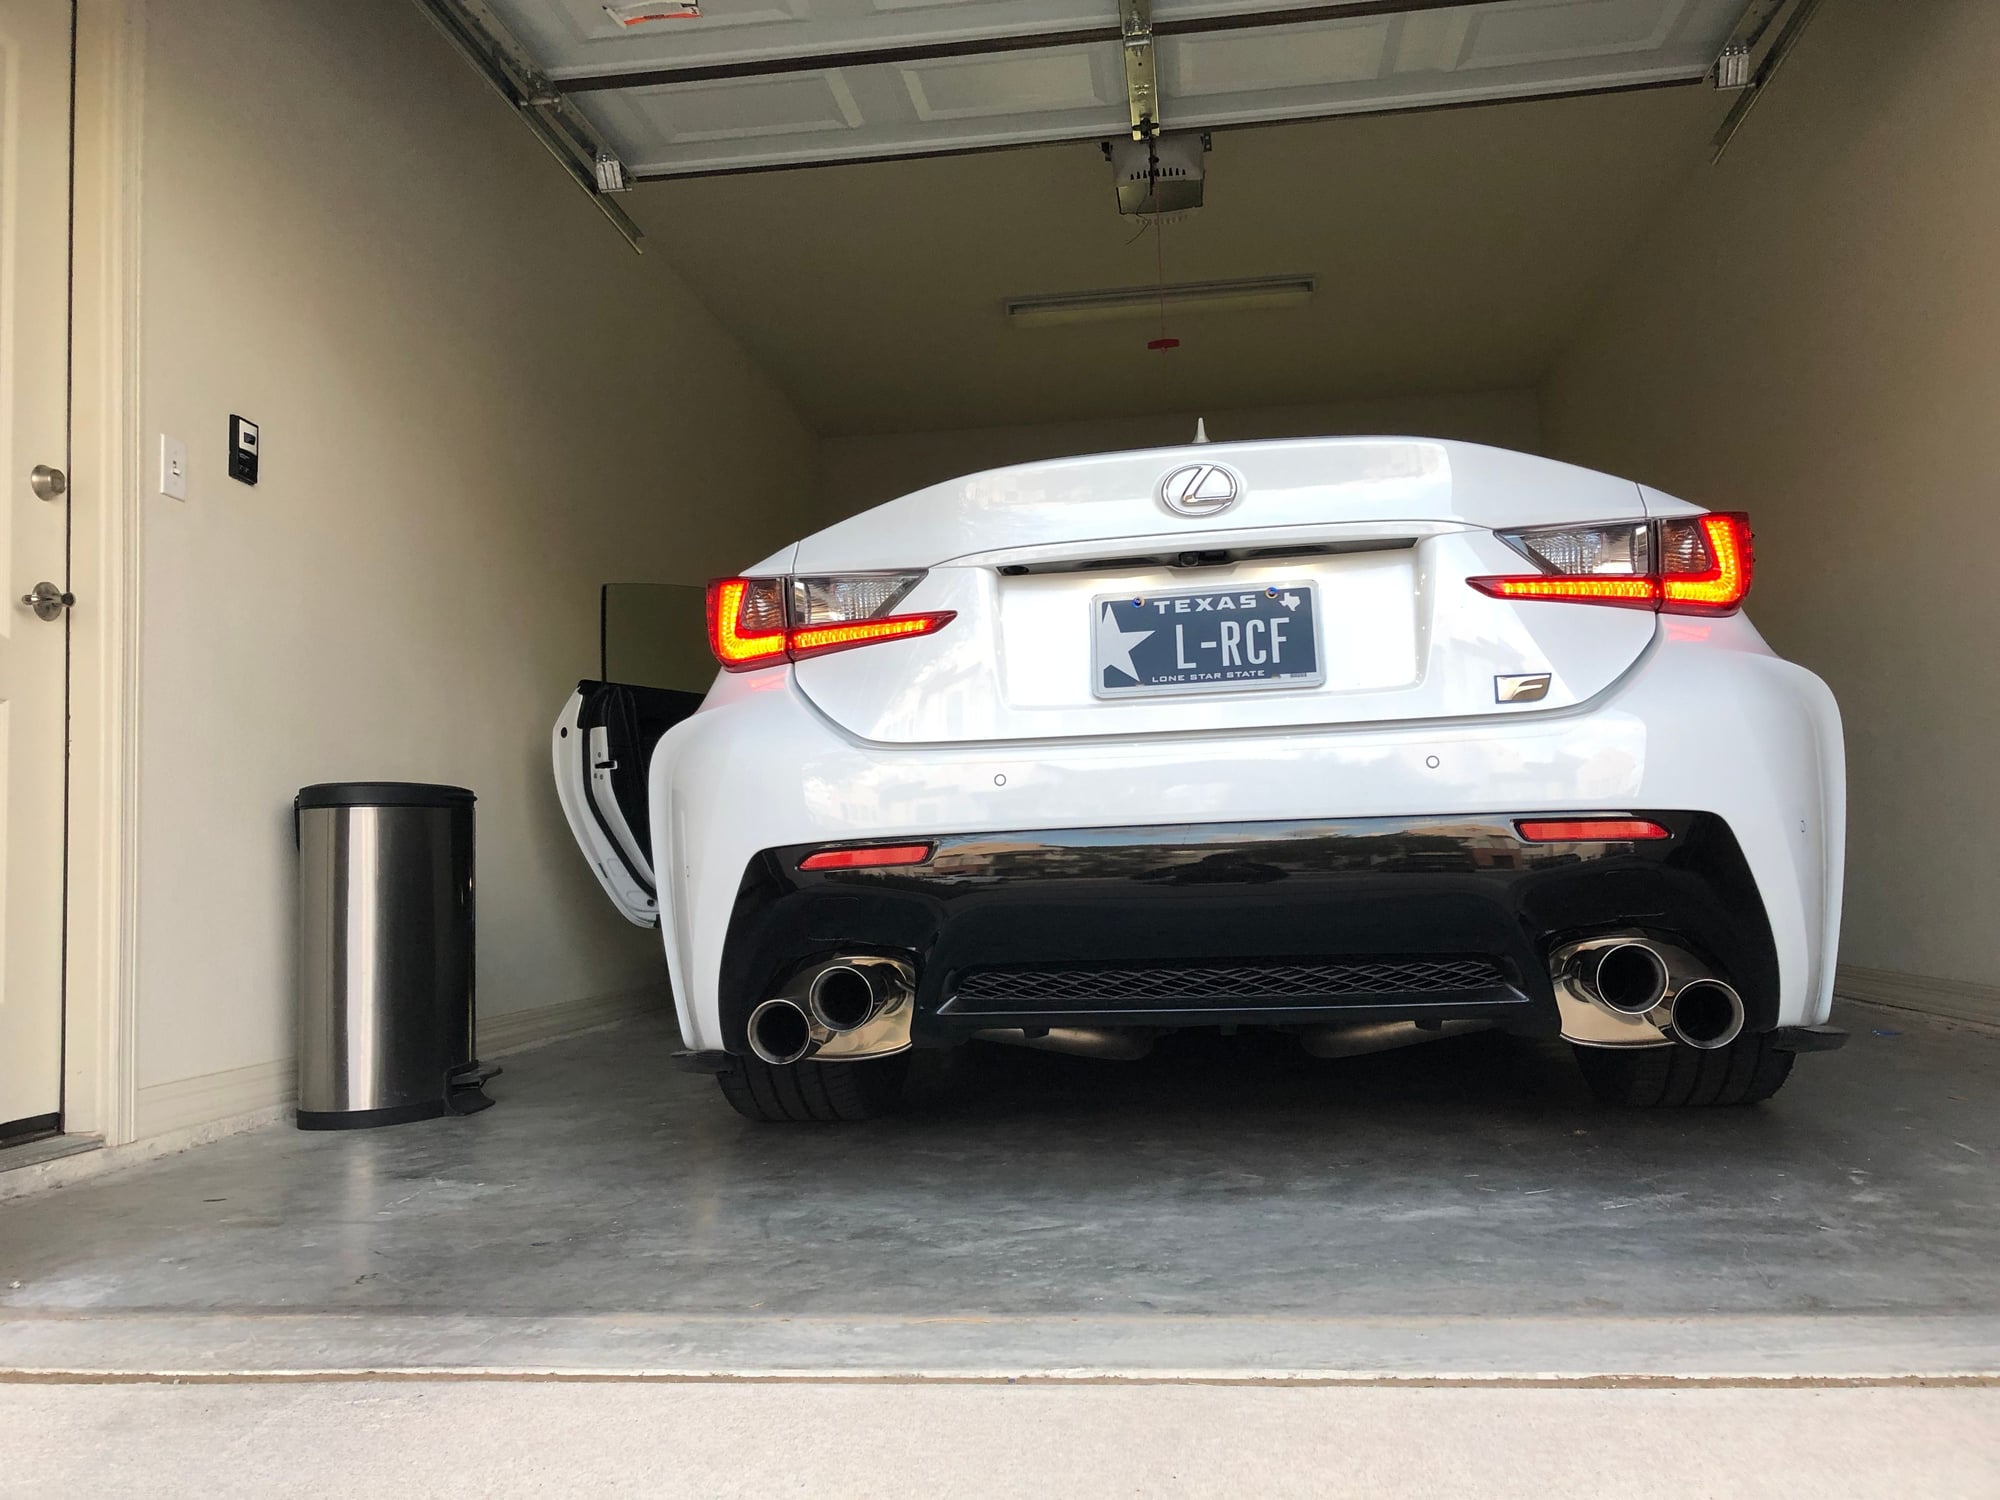 2017 Lexus RC F - 2017 RCF 4,000 miles - Used - VIN Jthhp5bcxh5006663 - 4,100 Miles - 8 cyl - 2WD - Automatic - Coupe - White - El Paso, TX 79936, United States